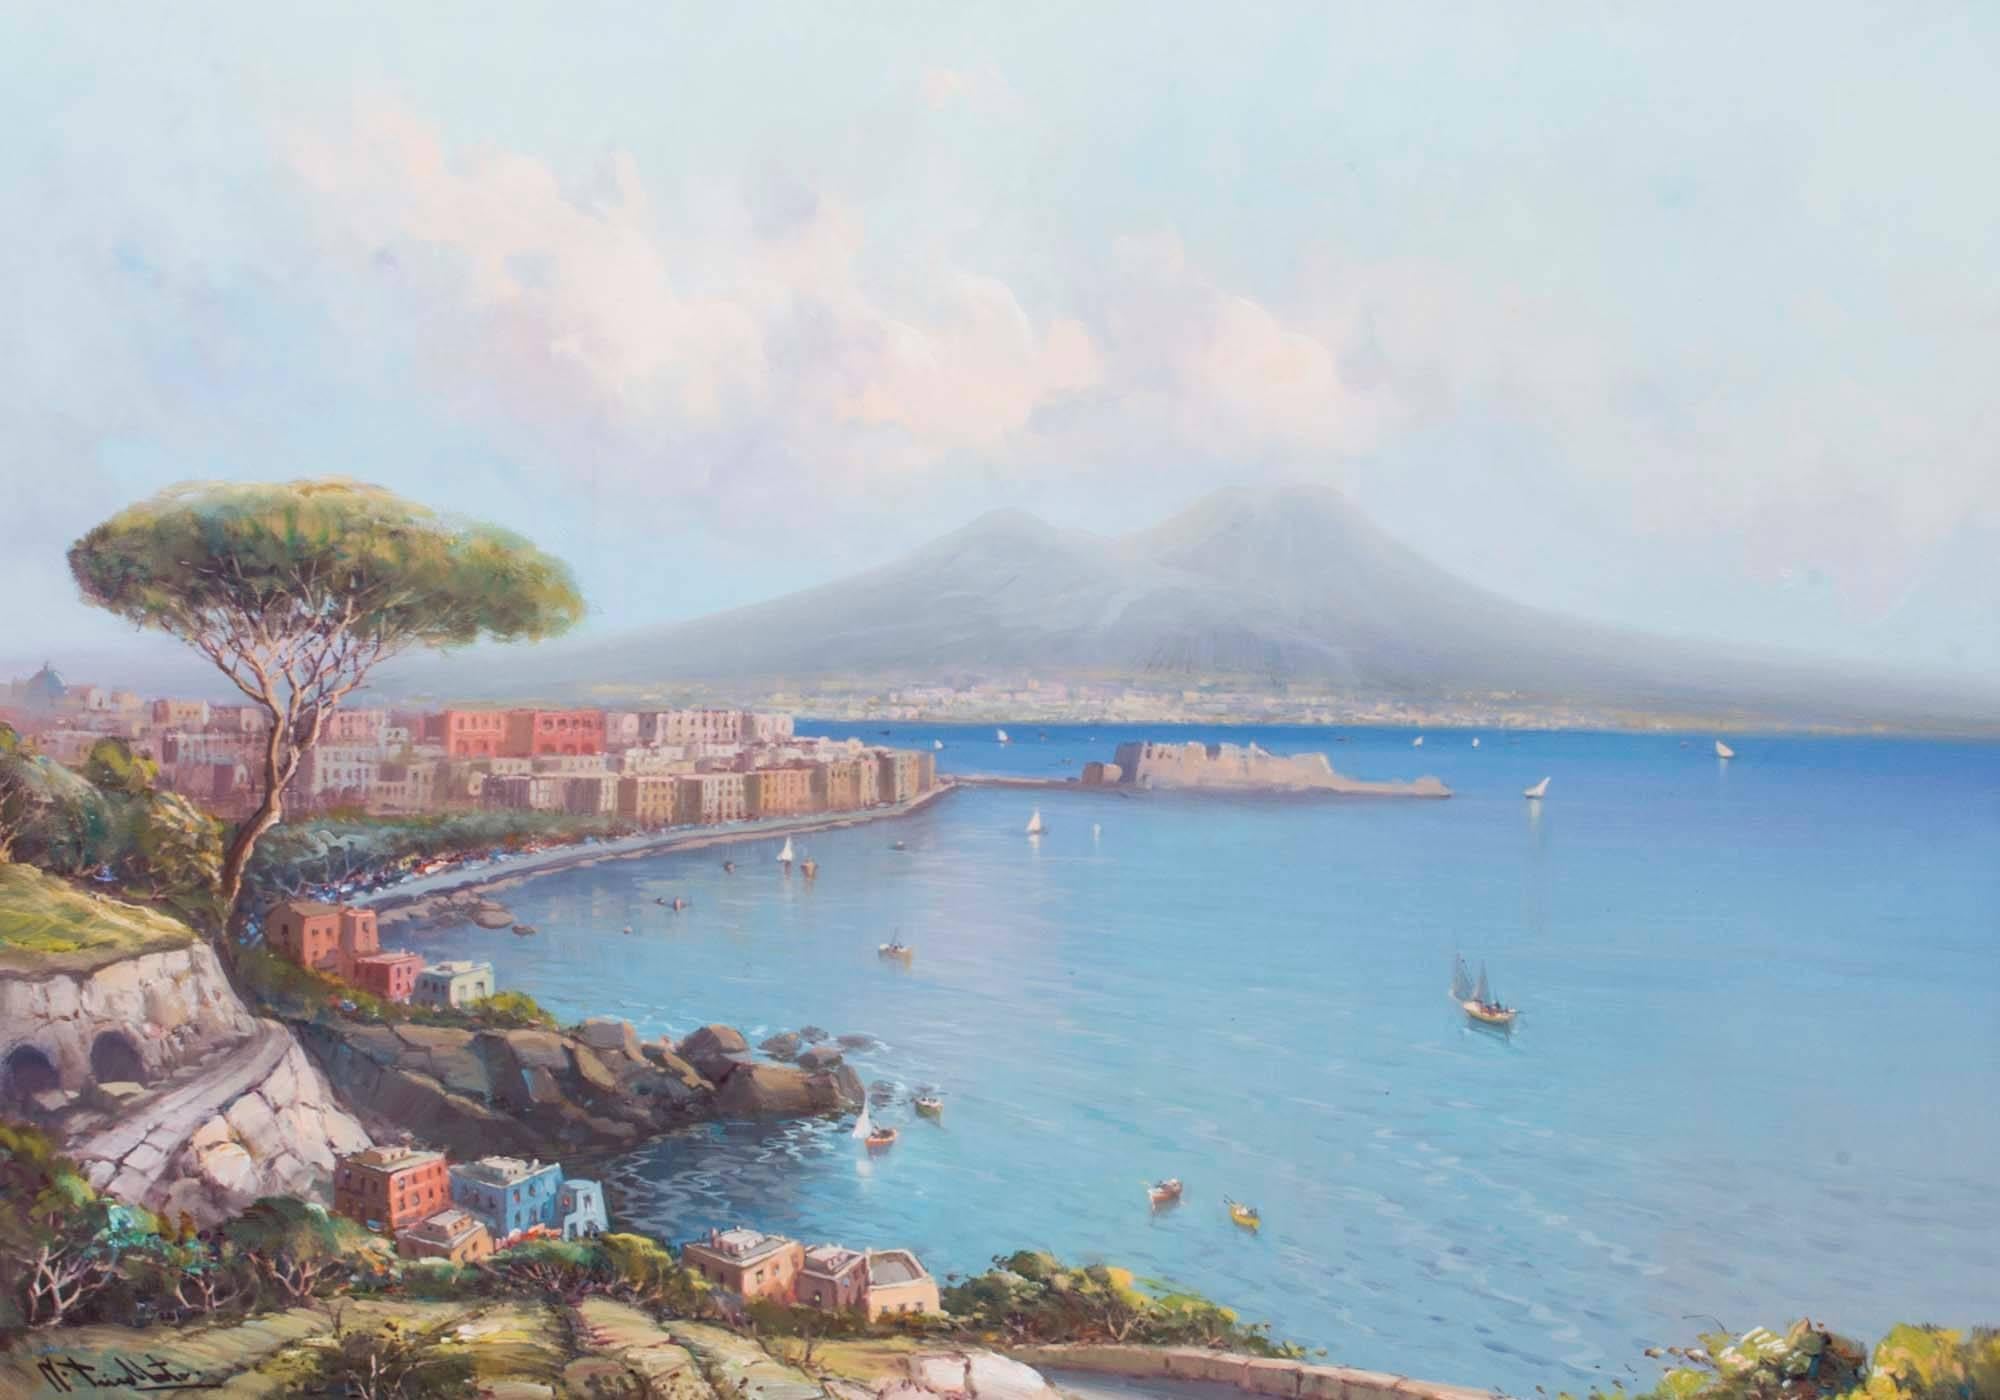 This is a very decorative vintage oil on canvas painting of the Bay of Naples, dating from the second half of the 20th century.

The painting depicts the panoramic view of the city of Naples, the winding roads with beautiful houses sitting beside